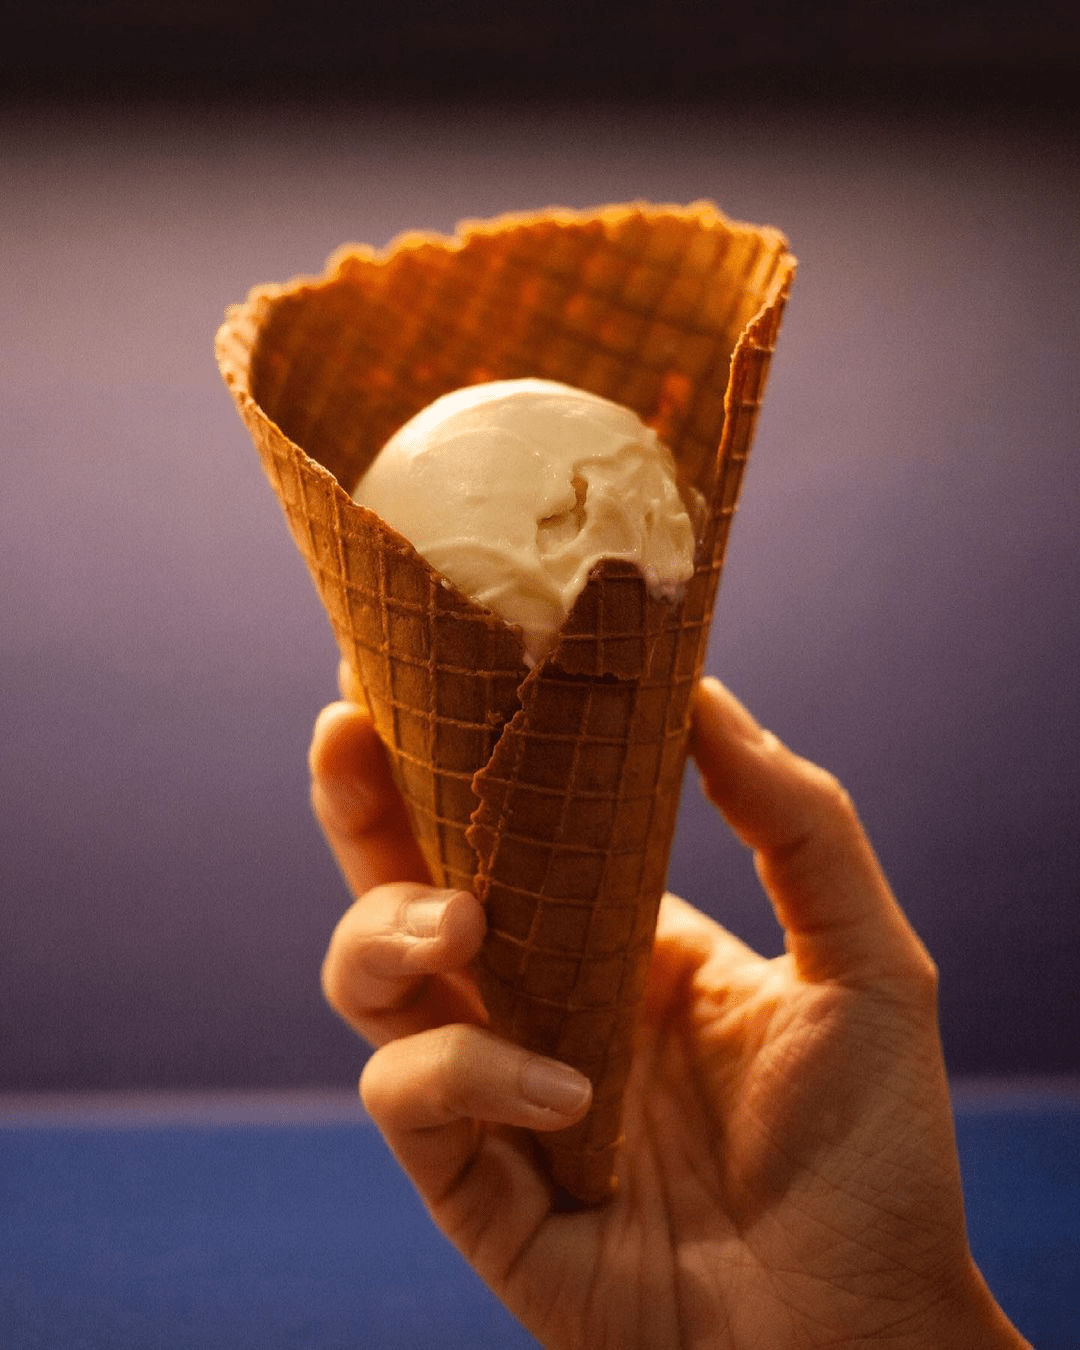 New Cafes And Restaurants June 2021 - Three Point Two MSW Gelato